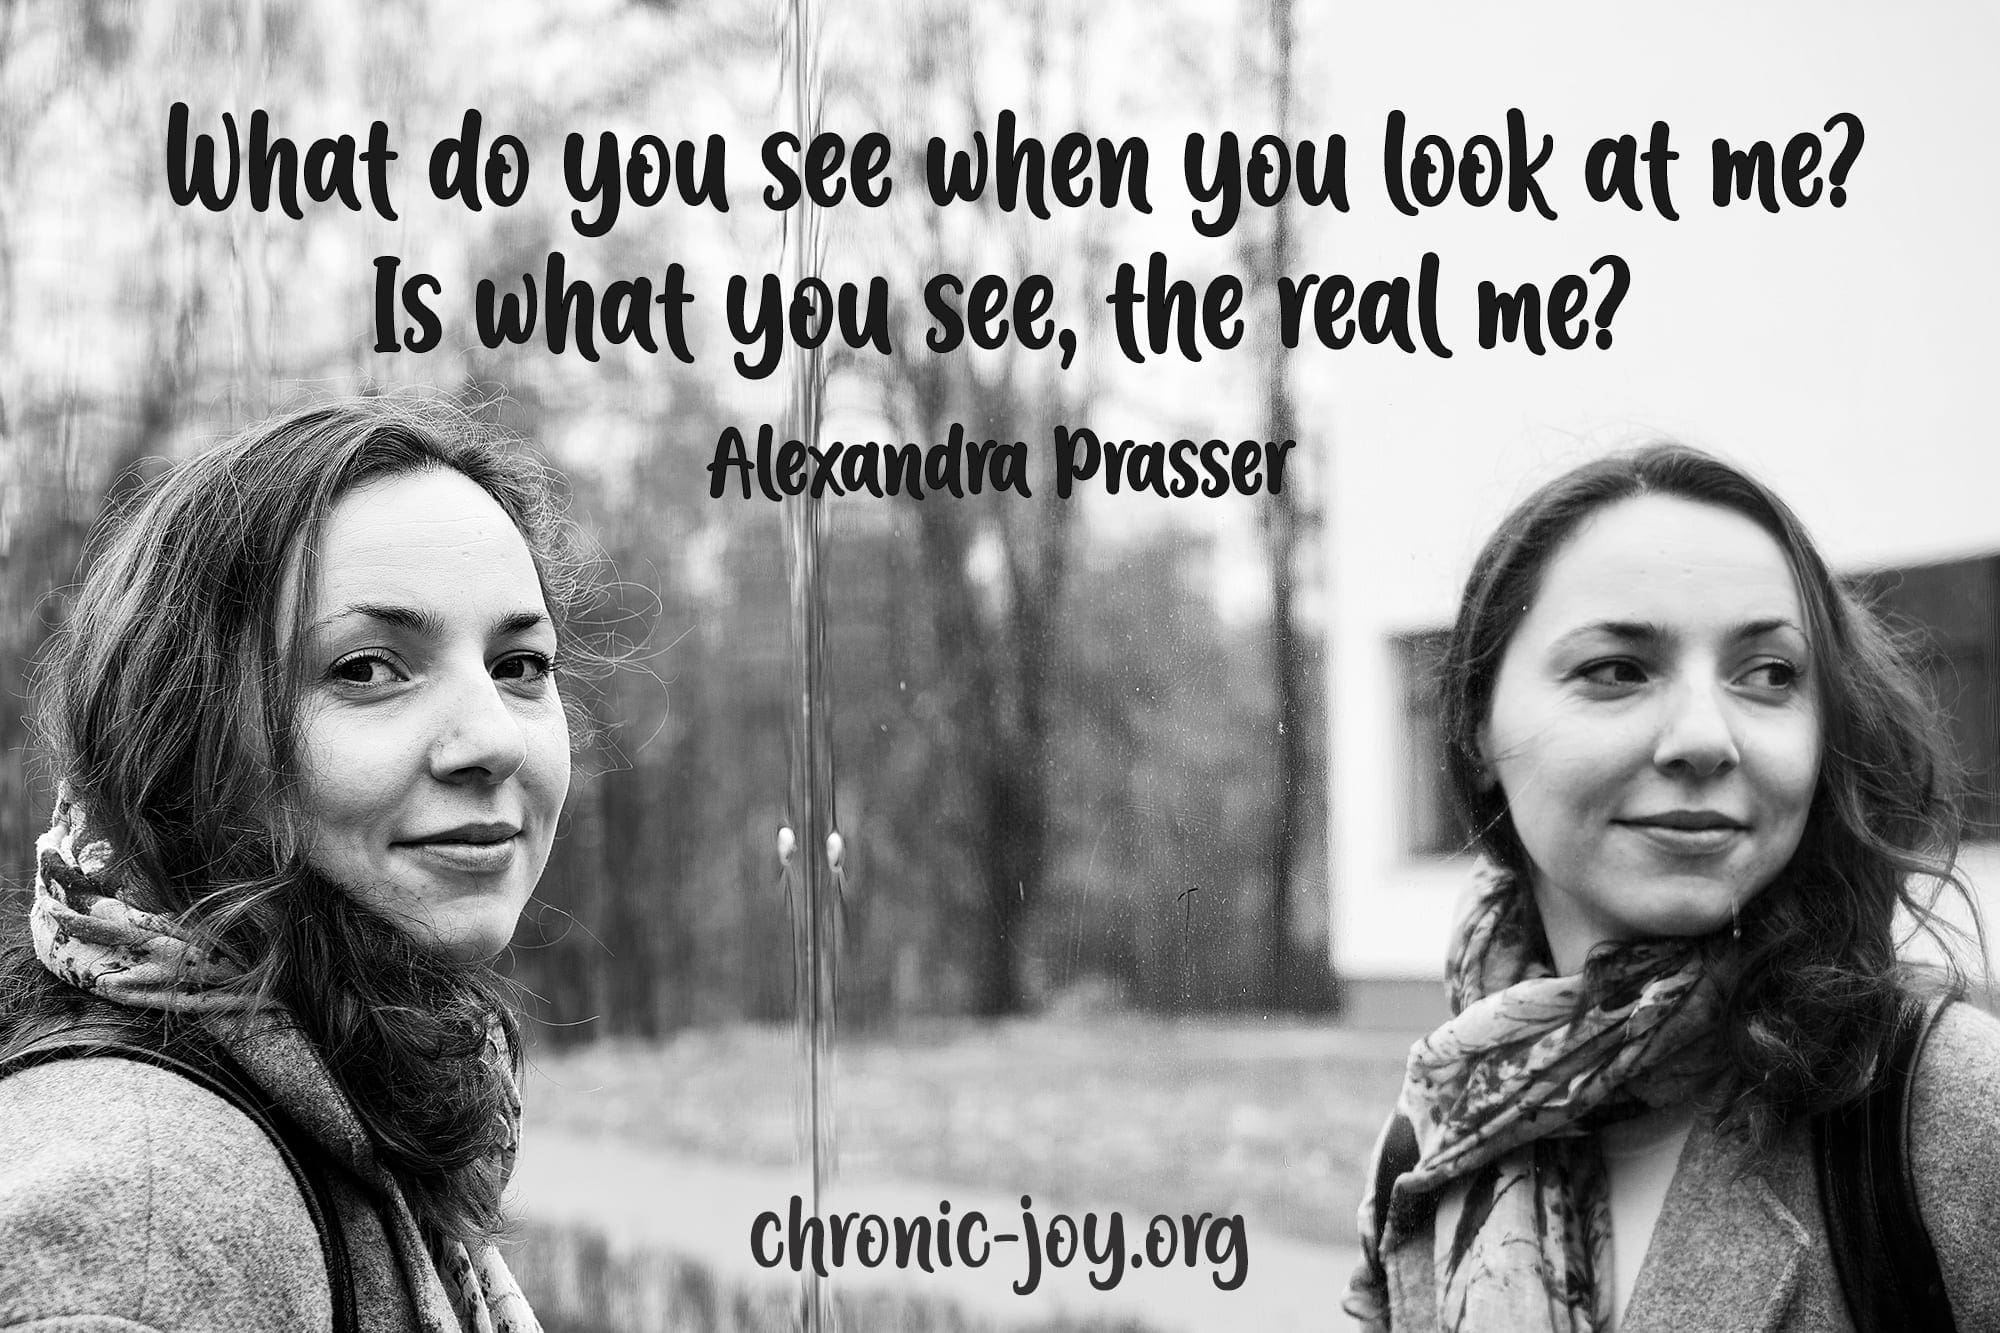 "What do you see when you look at me? Is what you see, the real me?" Alexandra Prasser